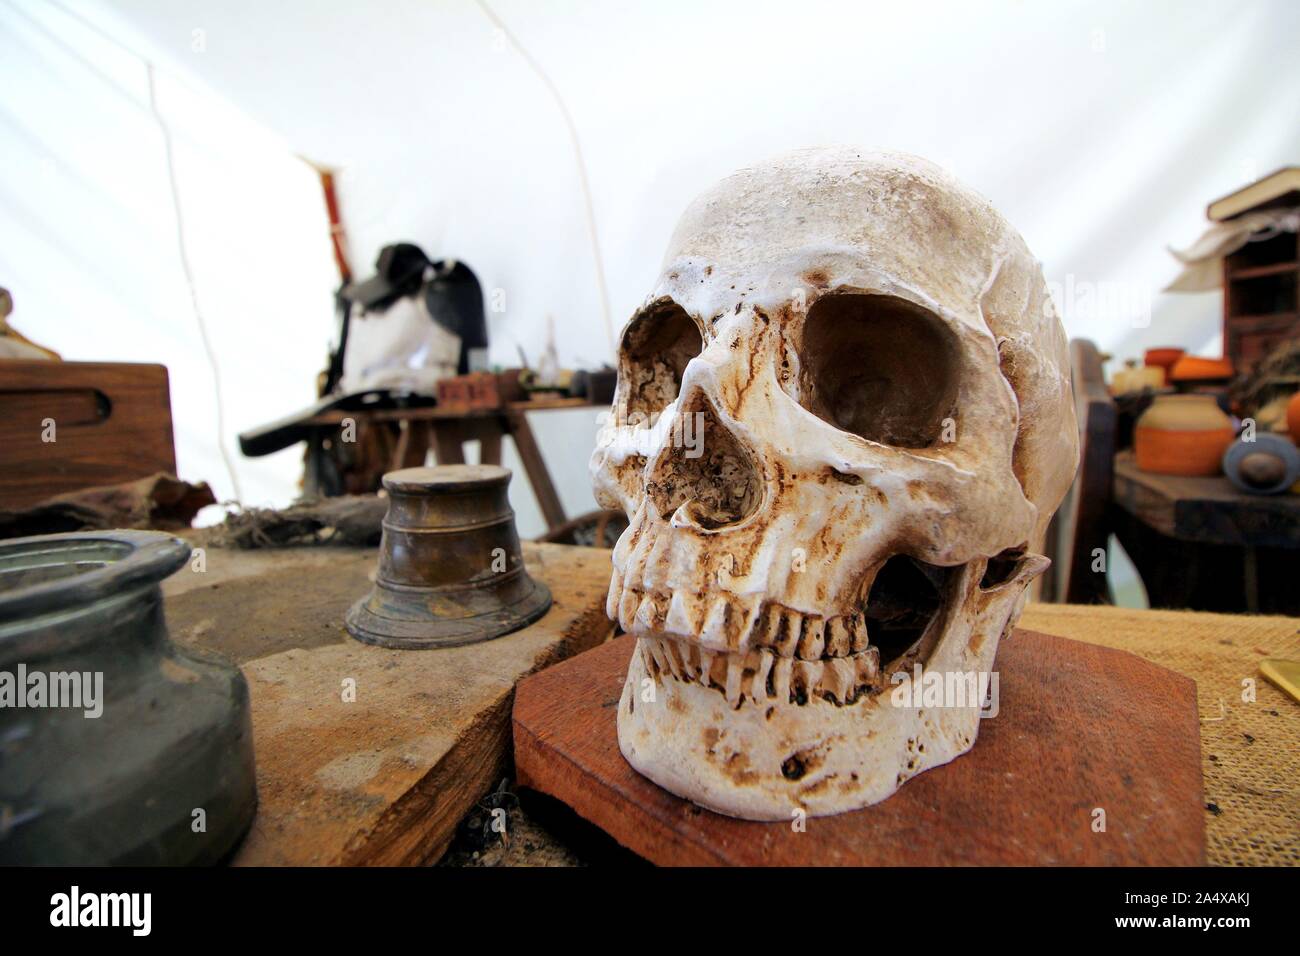 Skull and various old medical instruments, herbs and pots in an old medieval apothecary or chemists Stock Photo